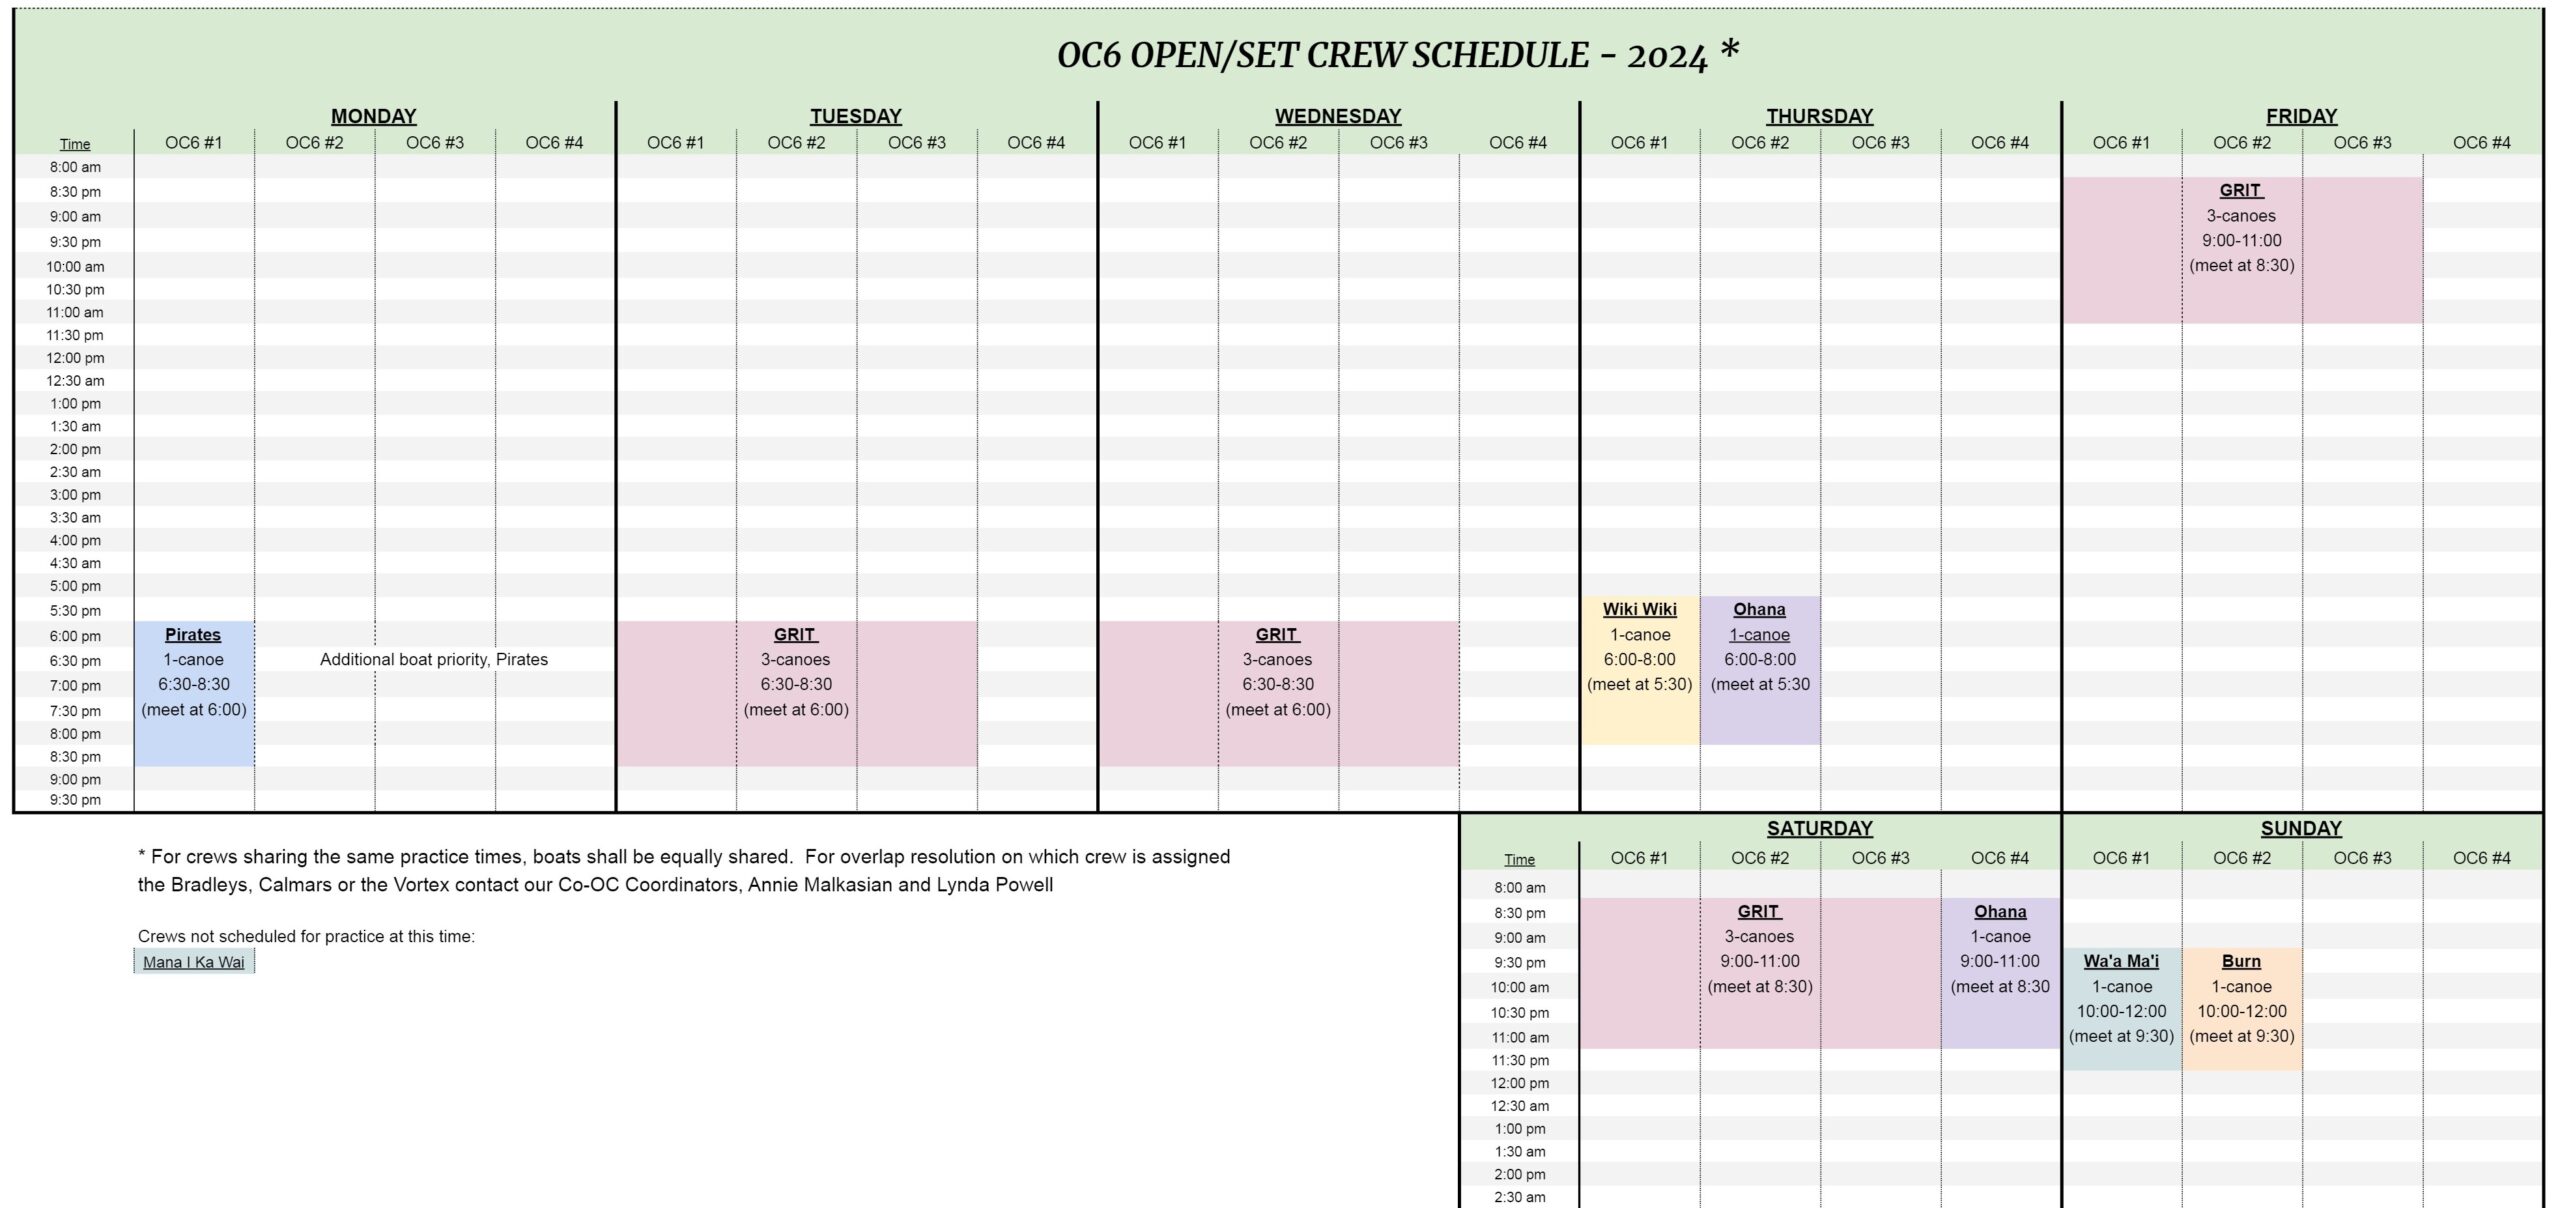 OC6 Set Crew Schedule (modified 12_18_23) - Sheet1_page1